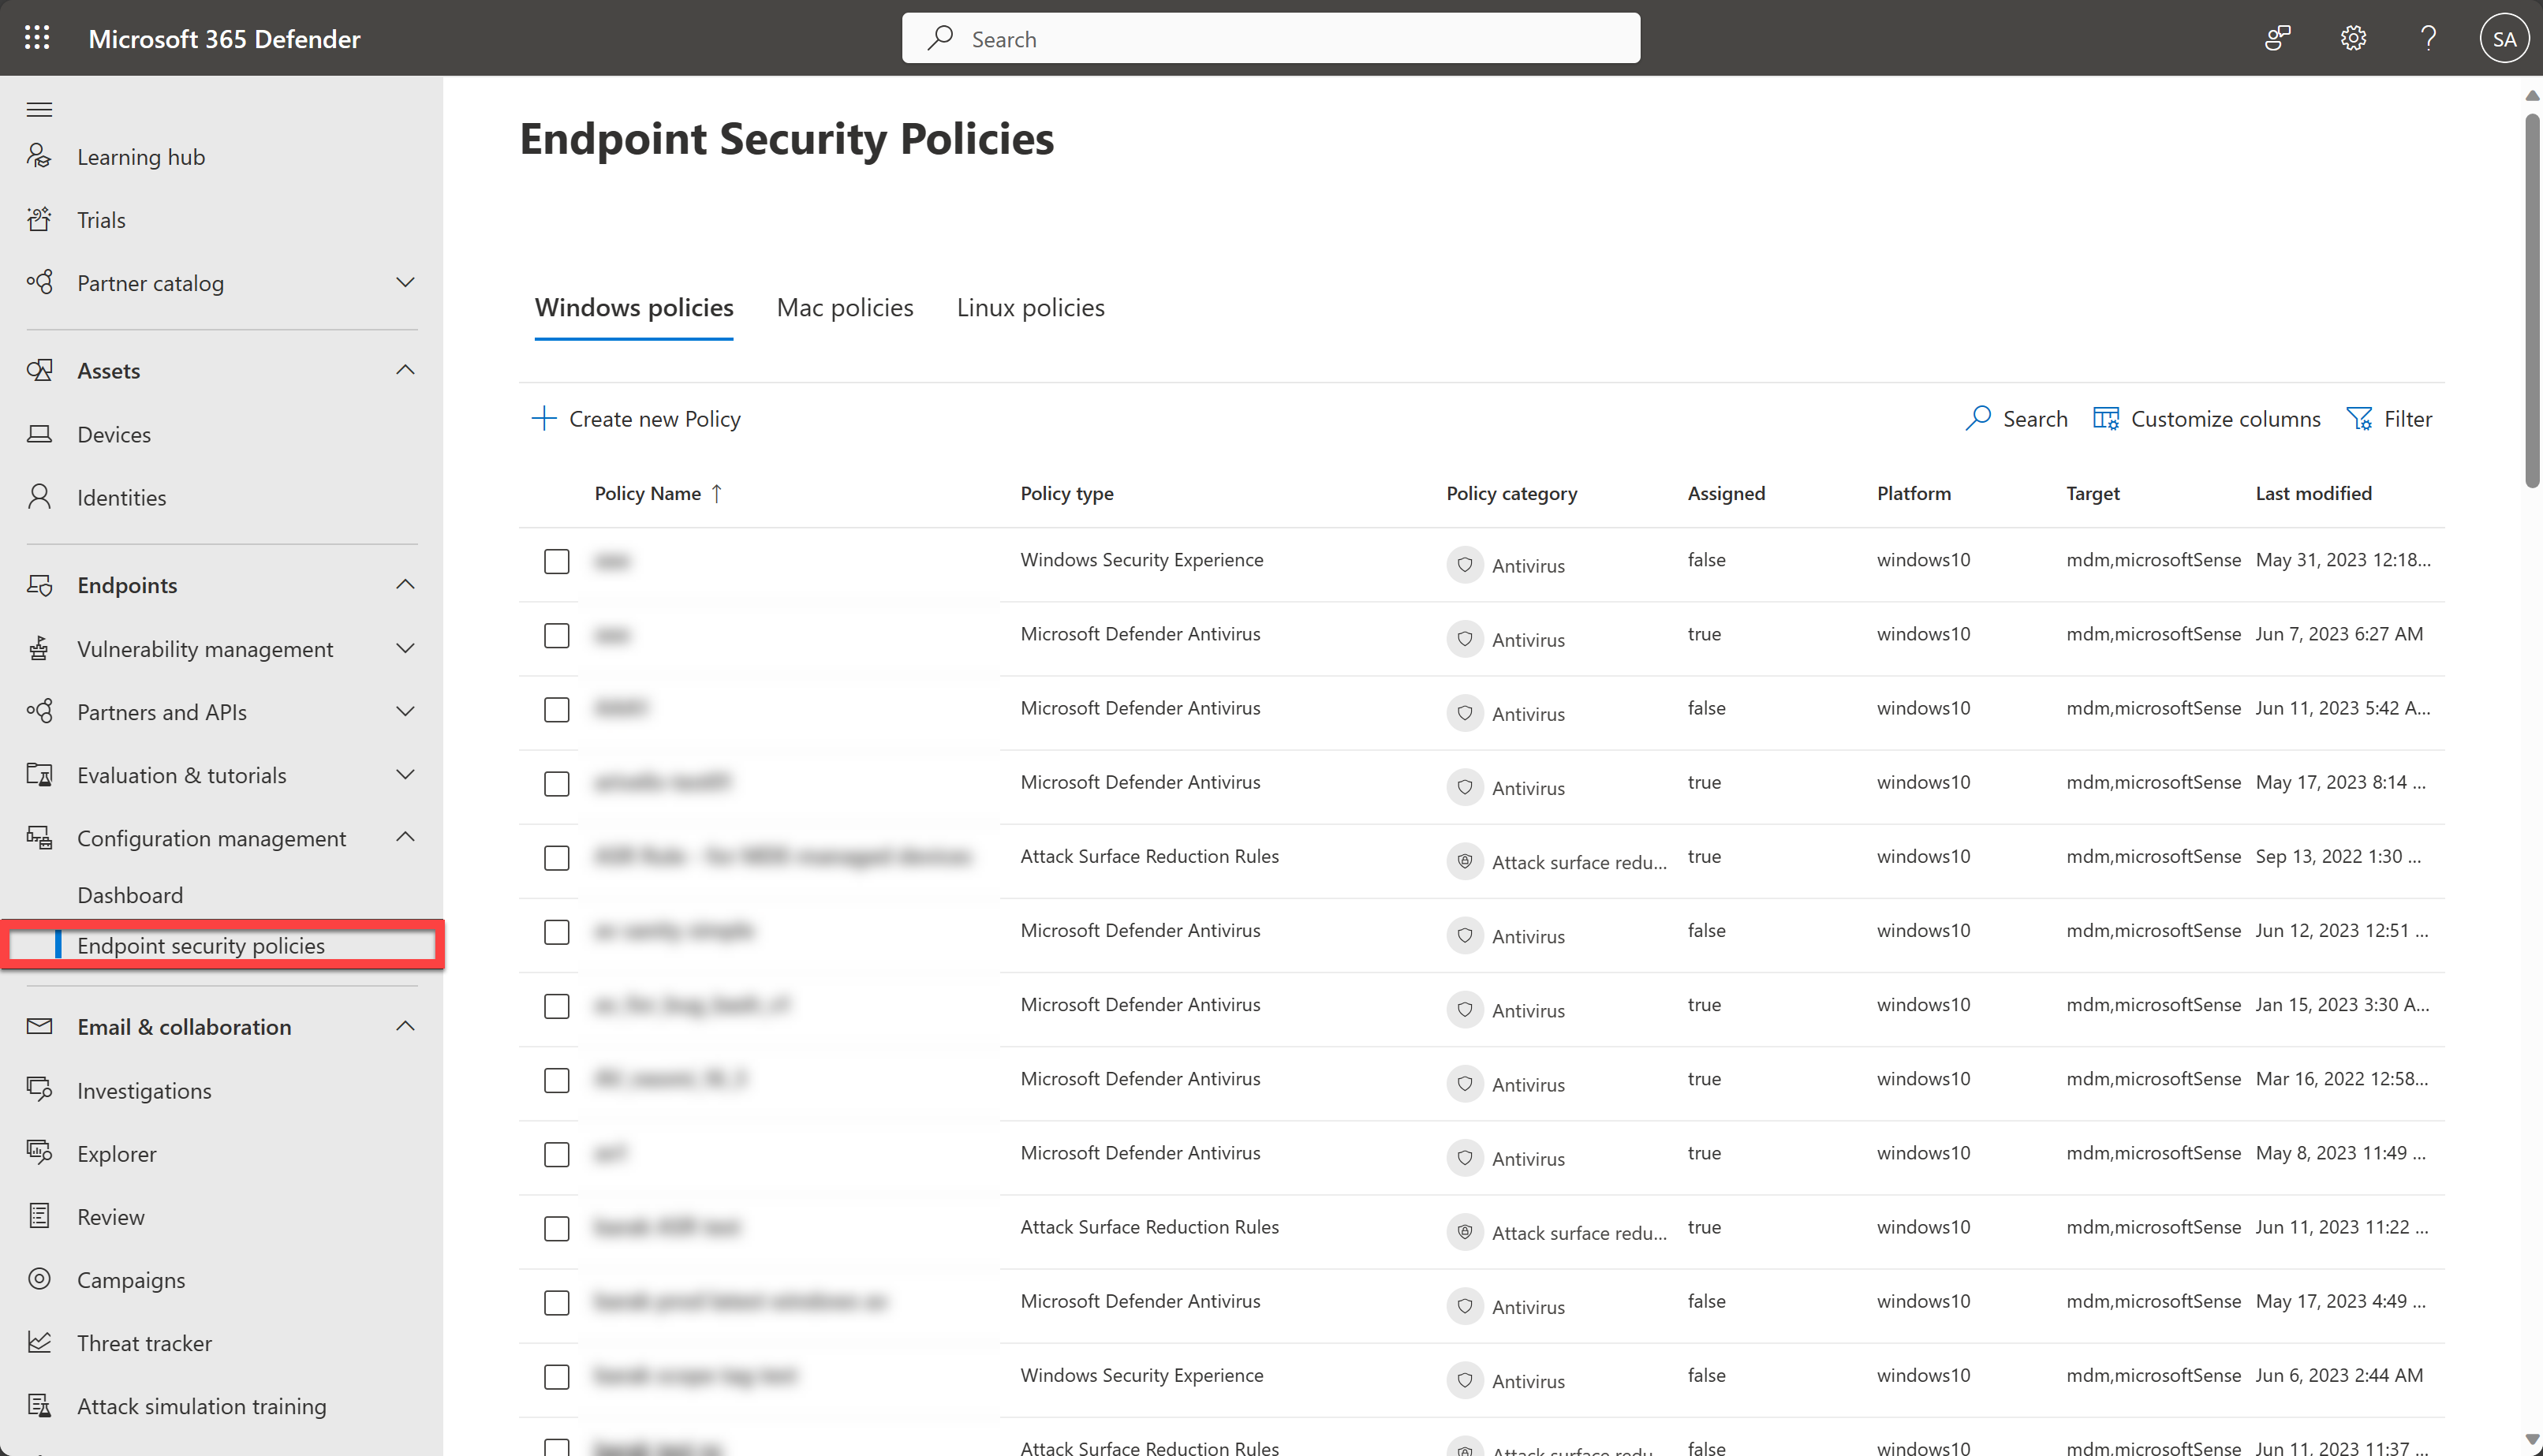 Managing Endpoint security policies in the Microsoft Defender portal